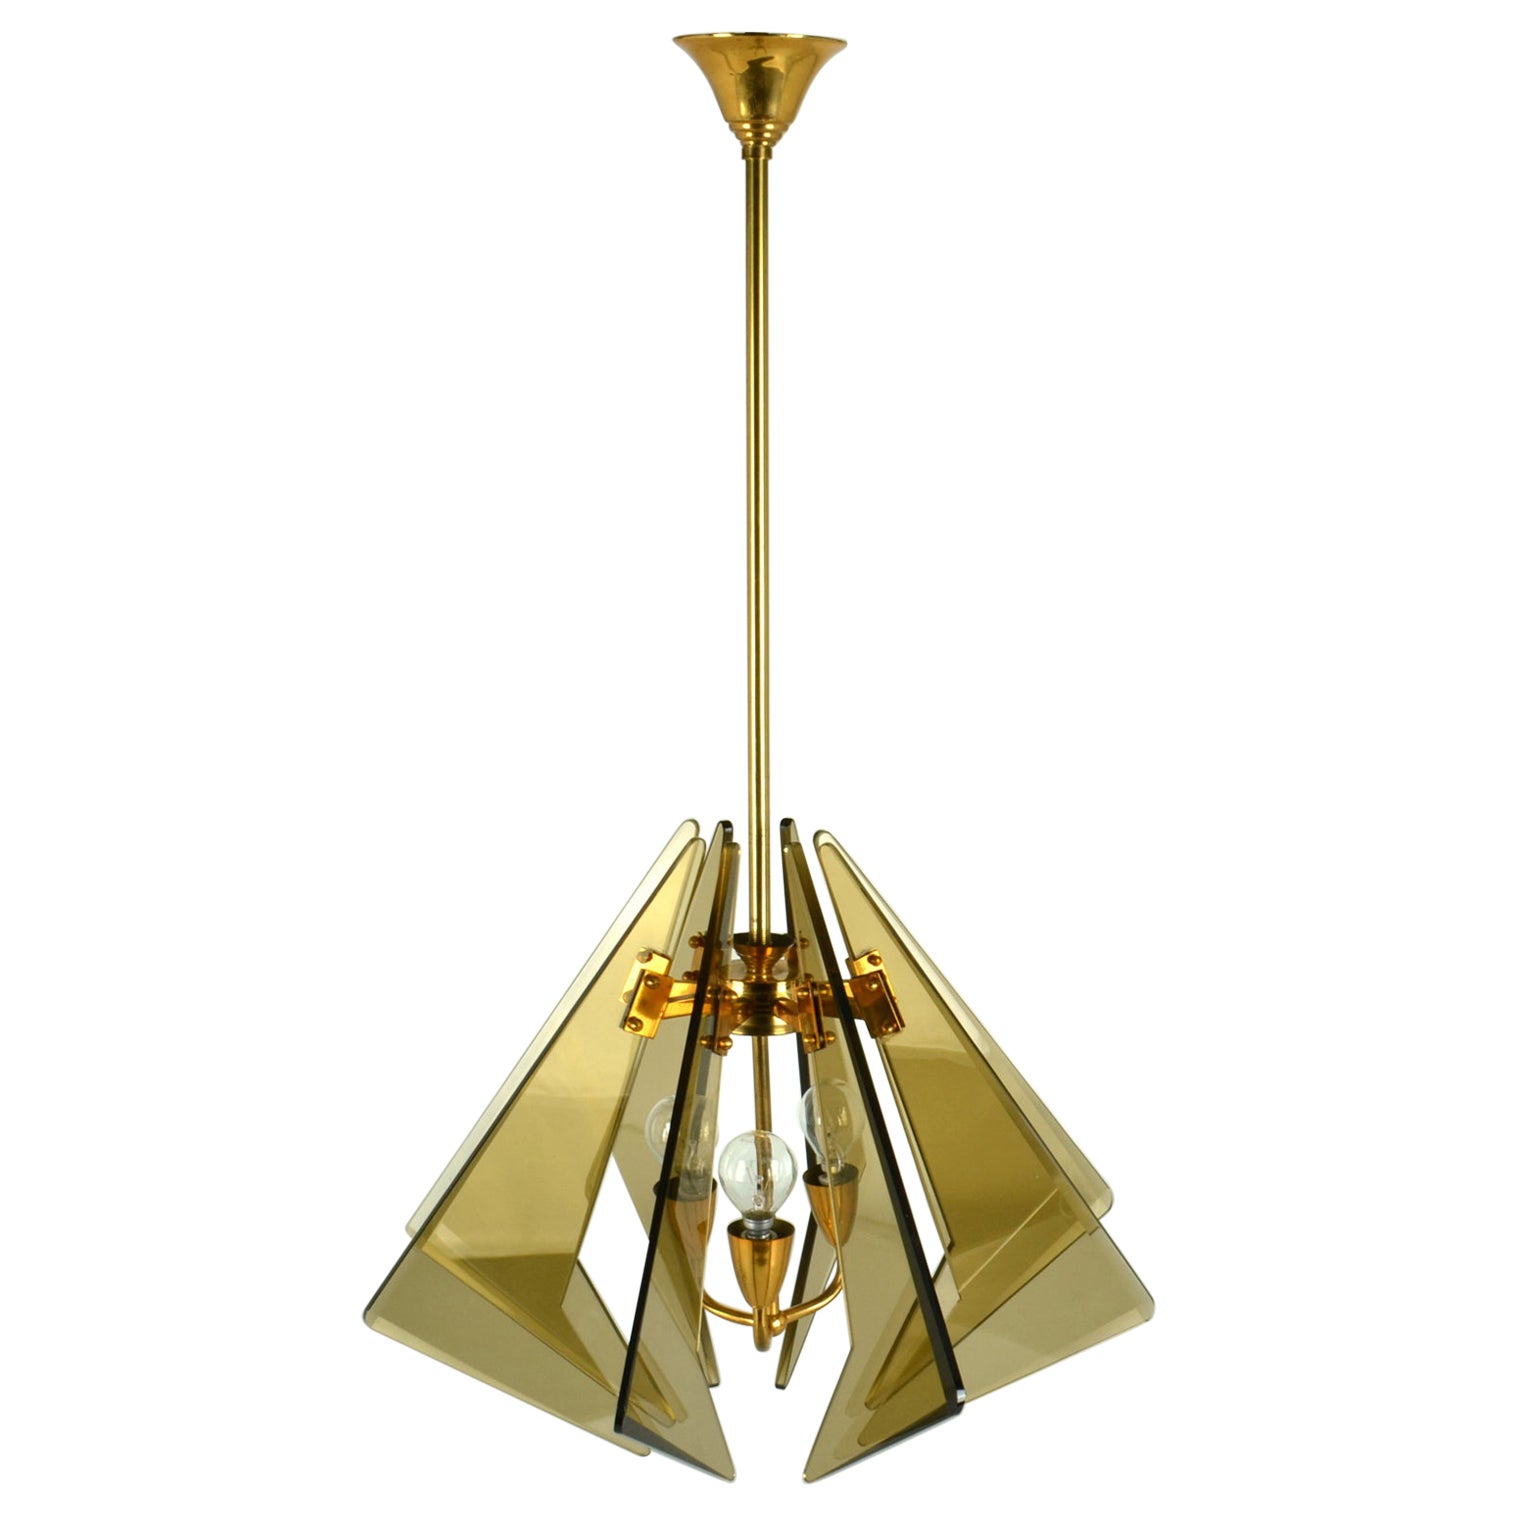 Chandelier inTinted Glass and Gilded Brass by Gino Paroldo, Fontana Arte For Sale